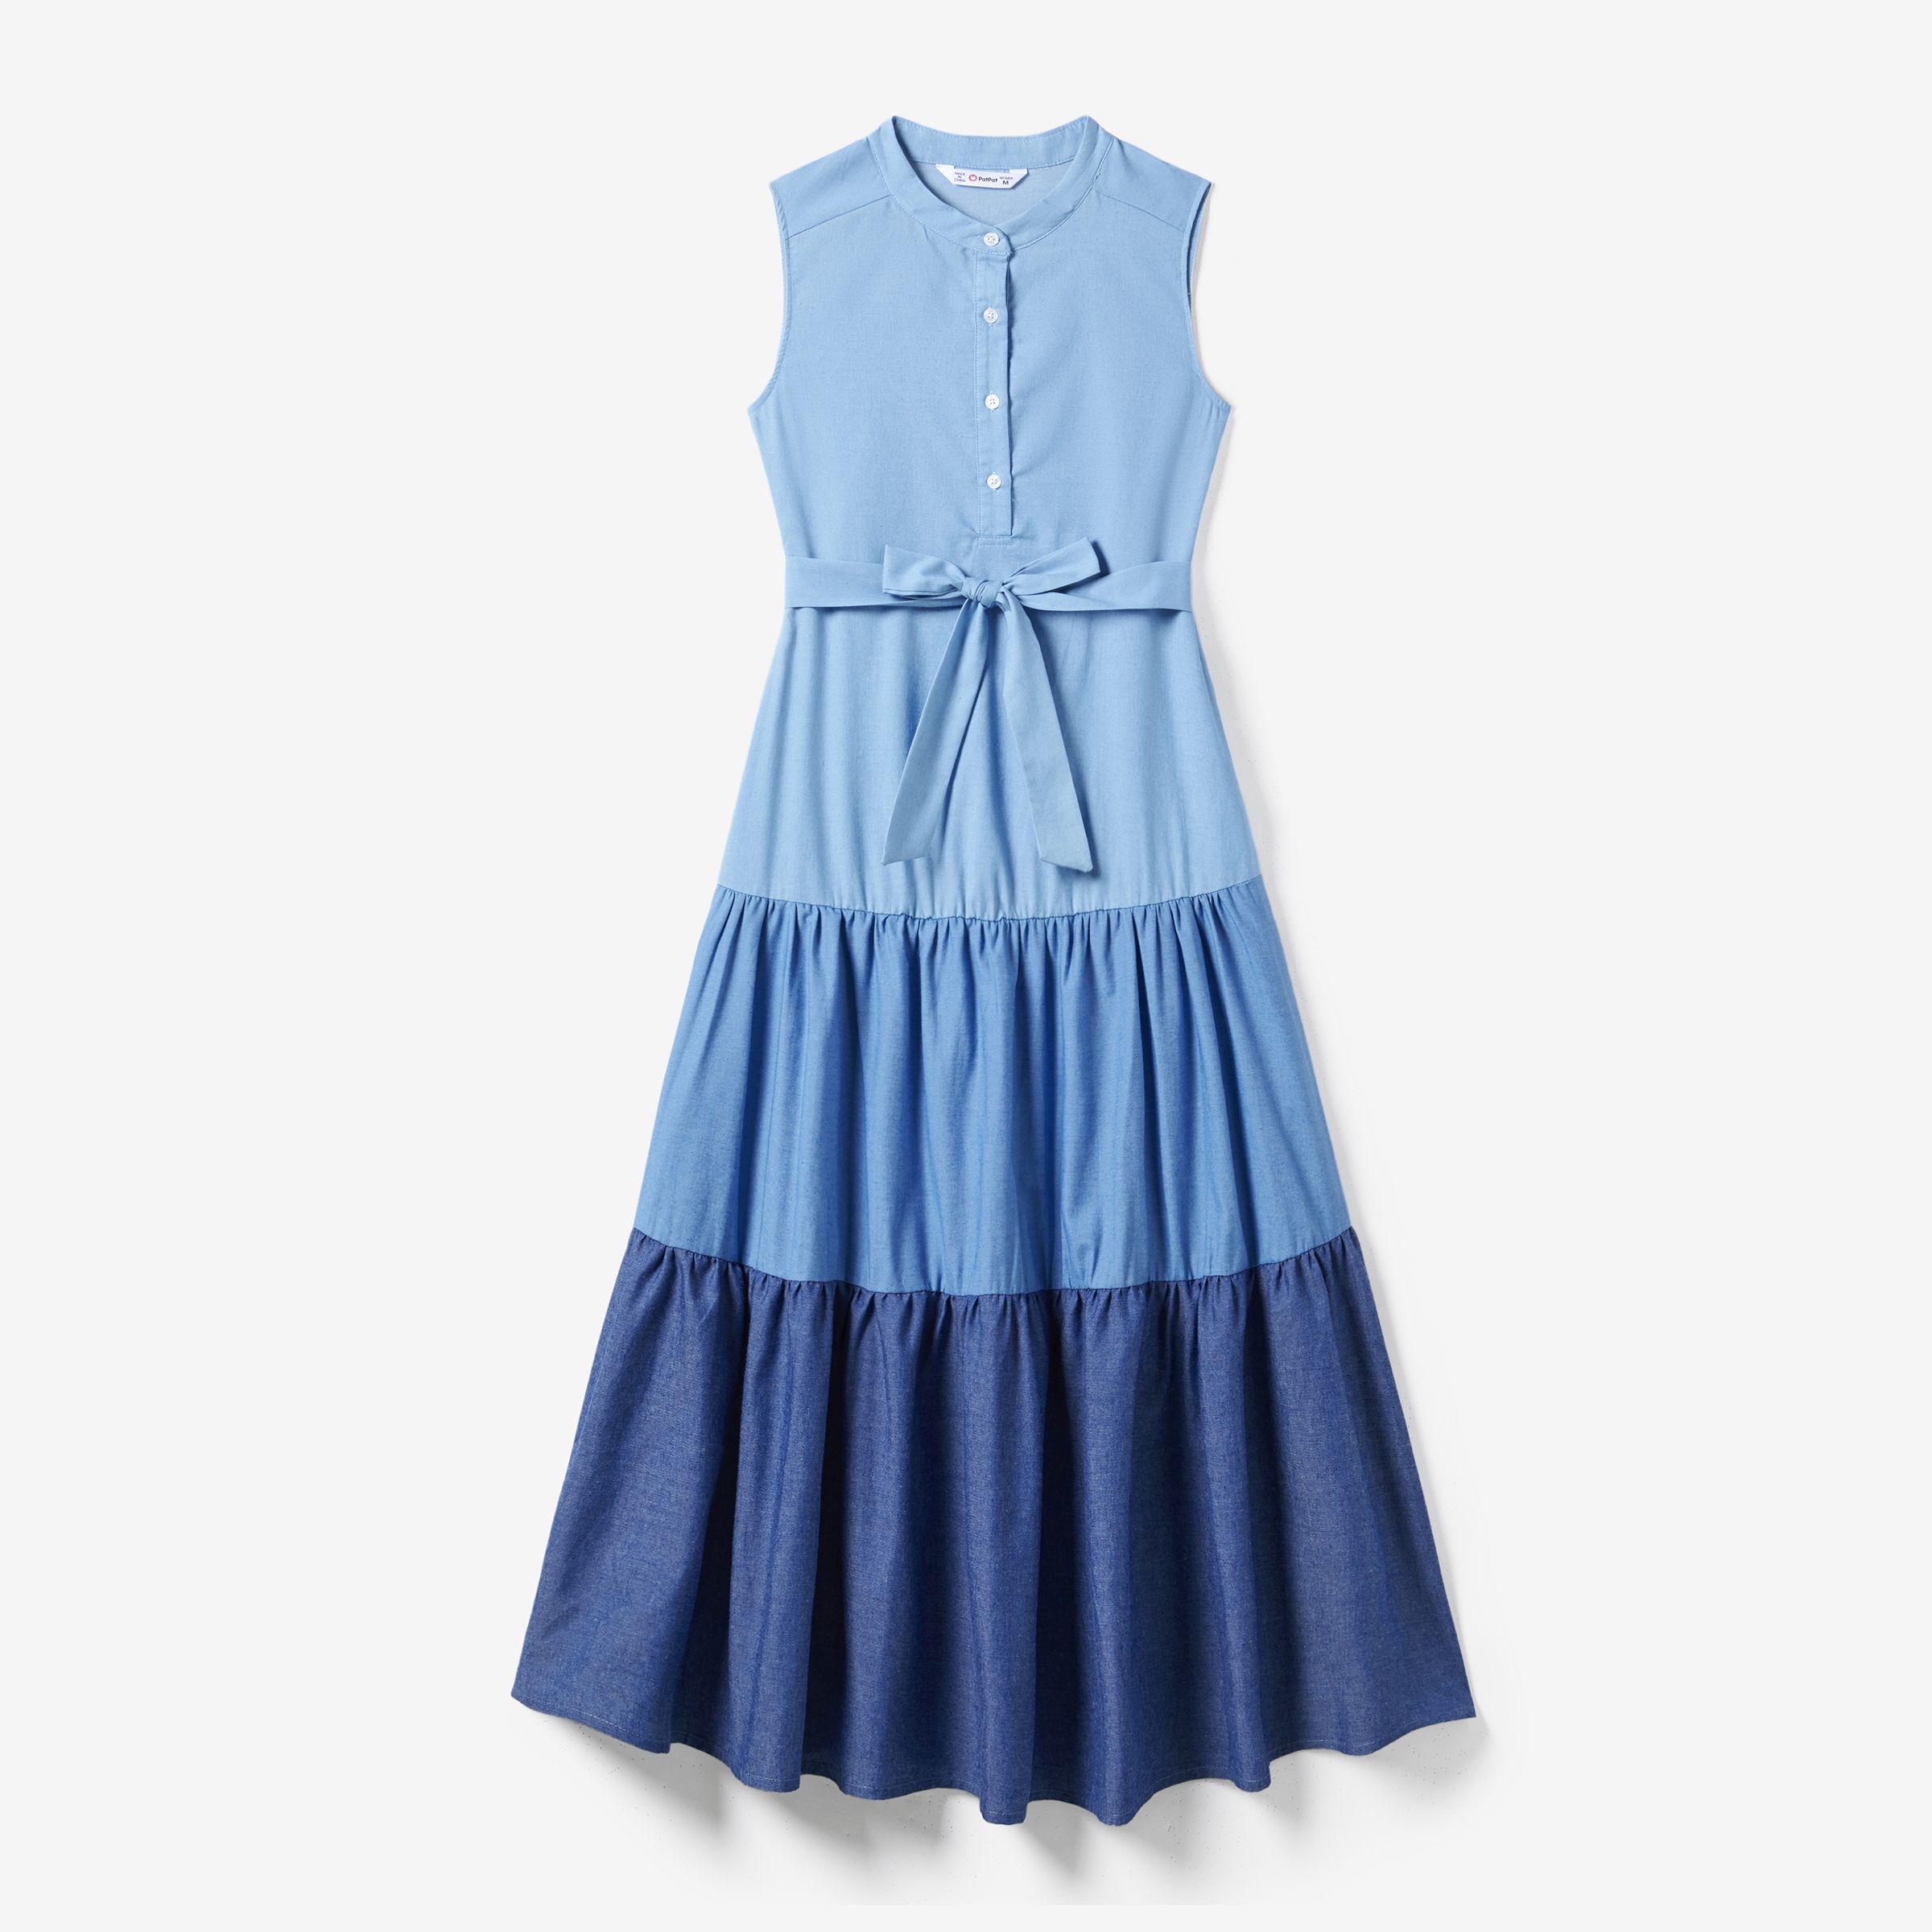 Family Matching Colorblock Shirt And Tiered A-line Pleated Dress Sets